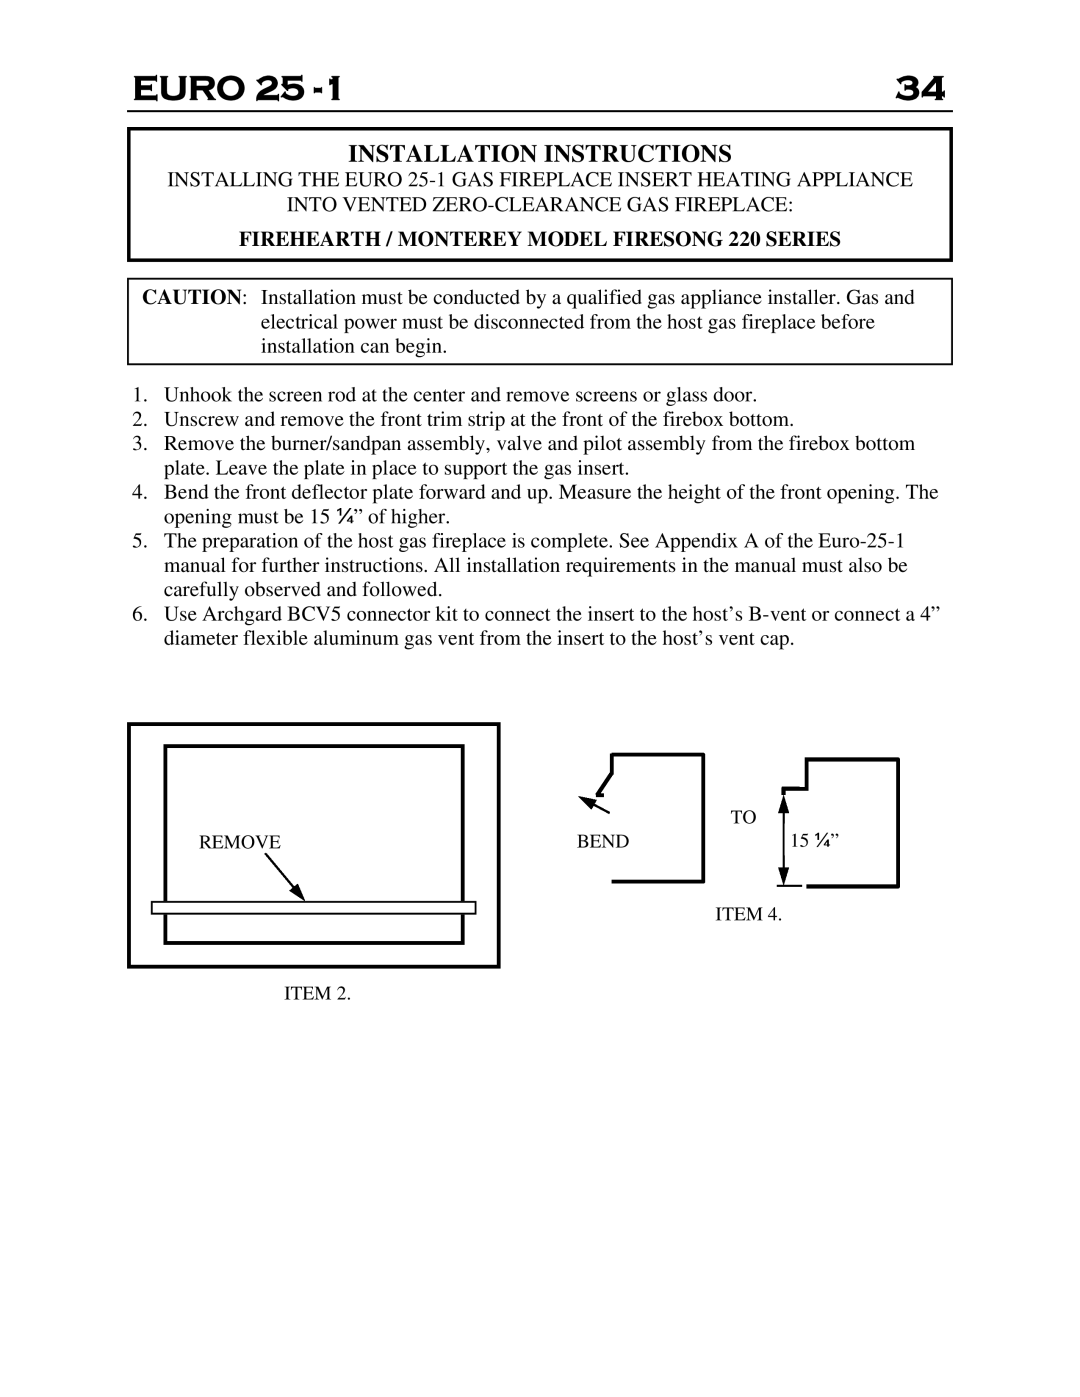 Delkin Devices EI - 25-1 manual Euro, Installation Instructions, FIREHEARTH / MONTEREY MODEL FIRESONG 220 SERIES 